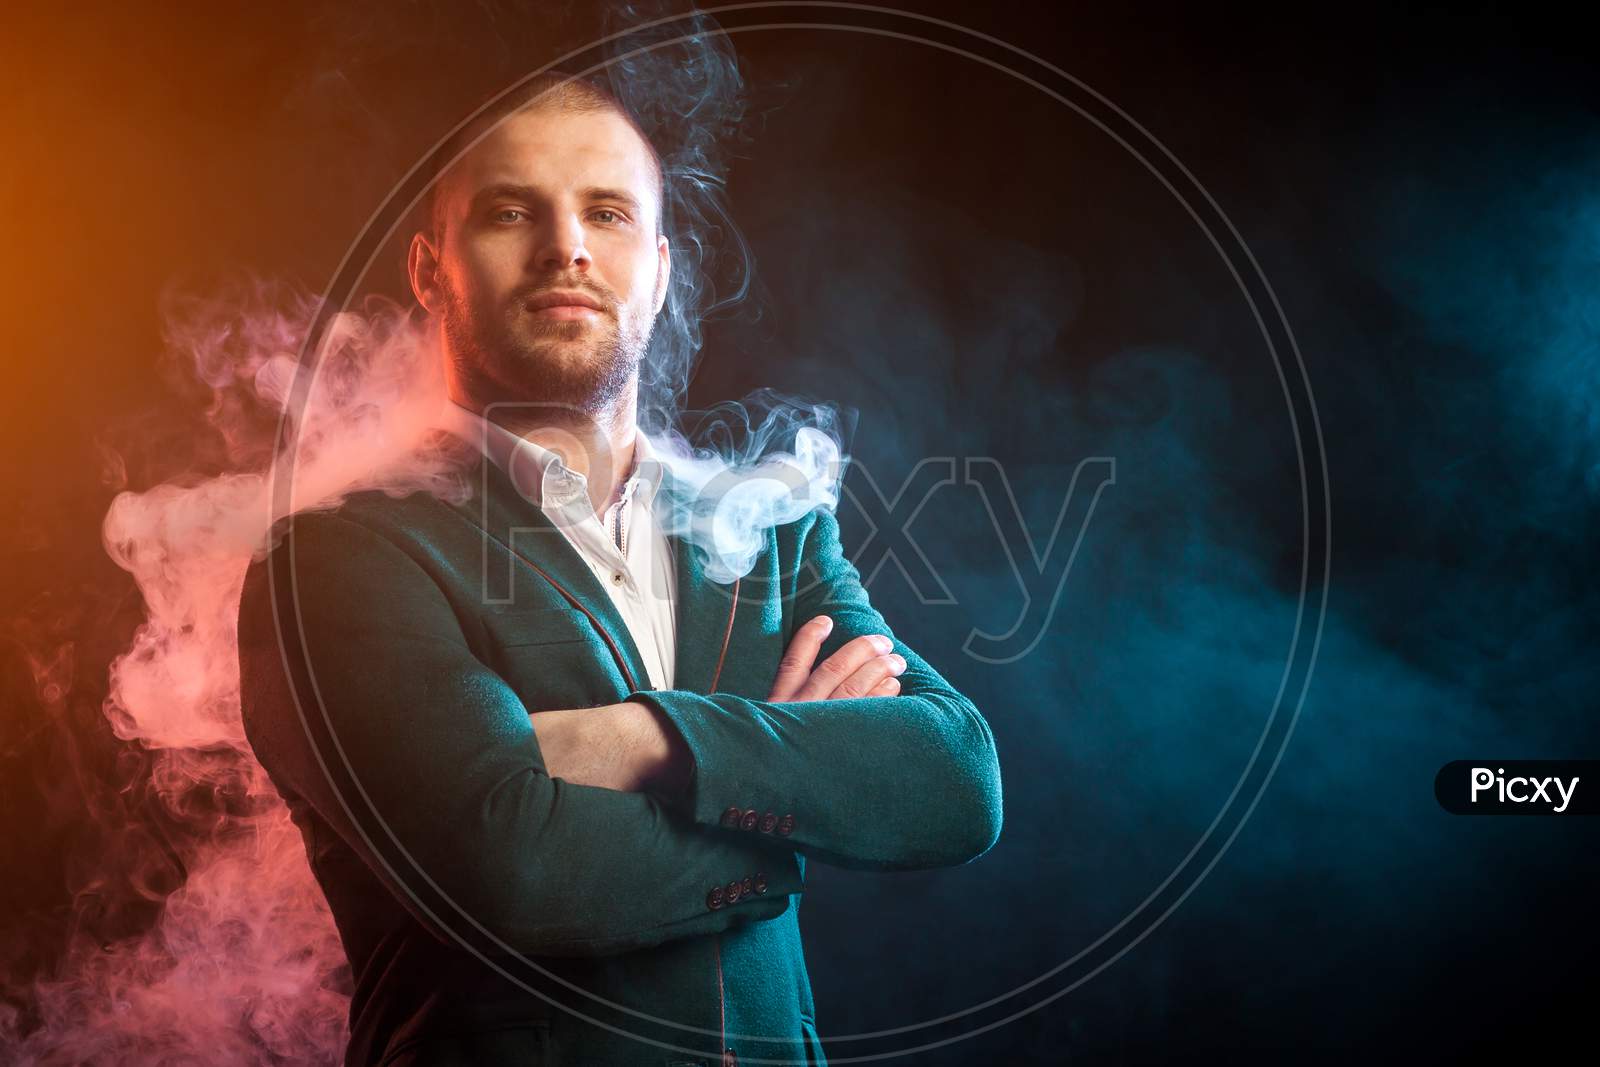 Young Handsome Man Head In A White Shirt And Green Jacket Smiling And Looking Thoughtfully Into The Camera Opposite Red And Blue Smoke From A Wipe On A Black Isolated Background